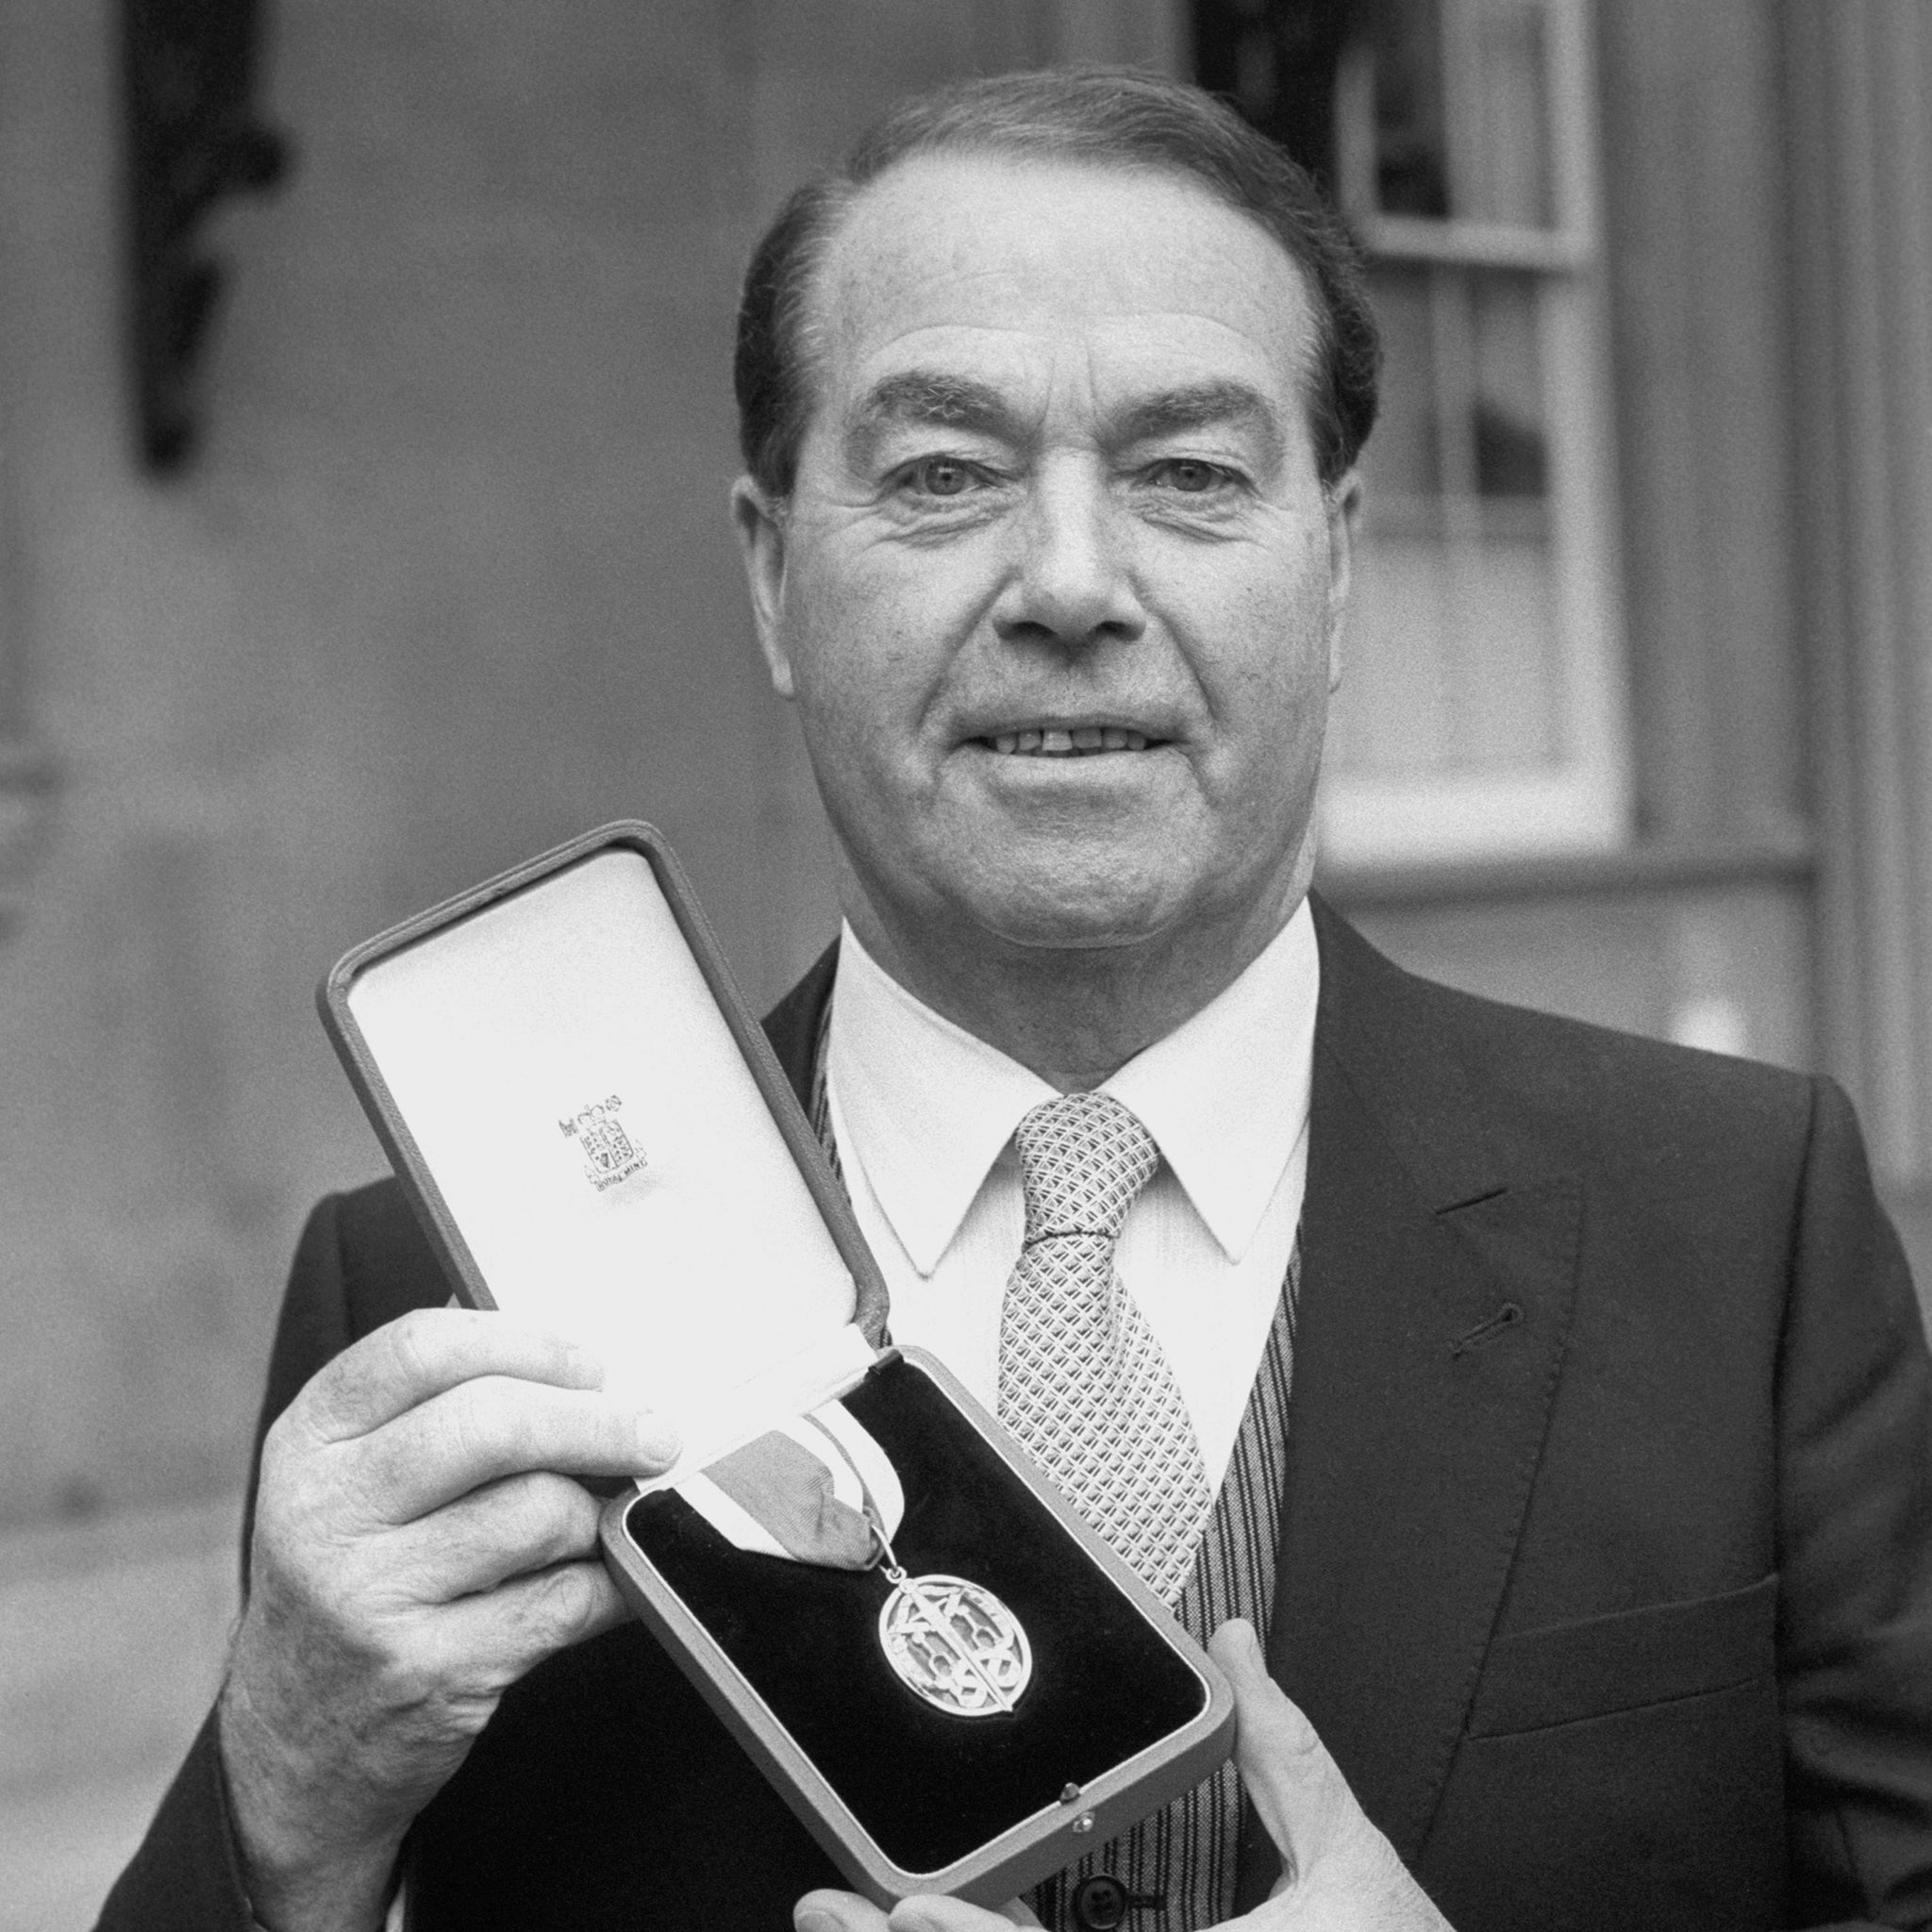 McQuarrie outside Buckingham Palace in 1987 after receiving his knighthood